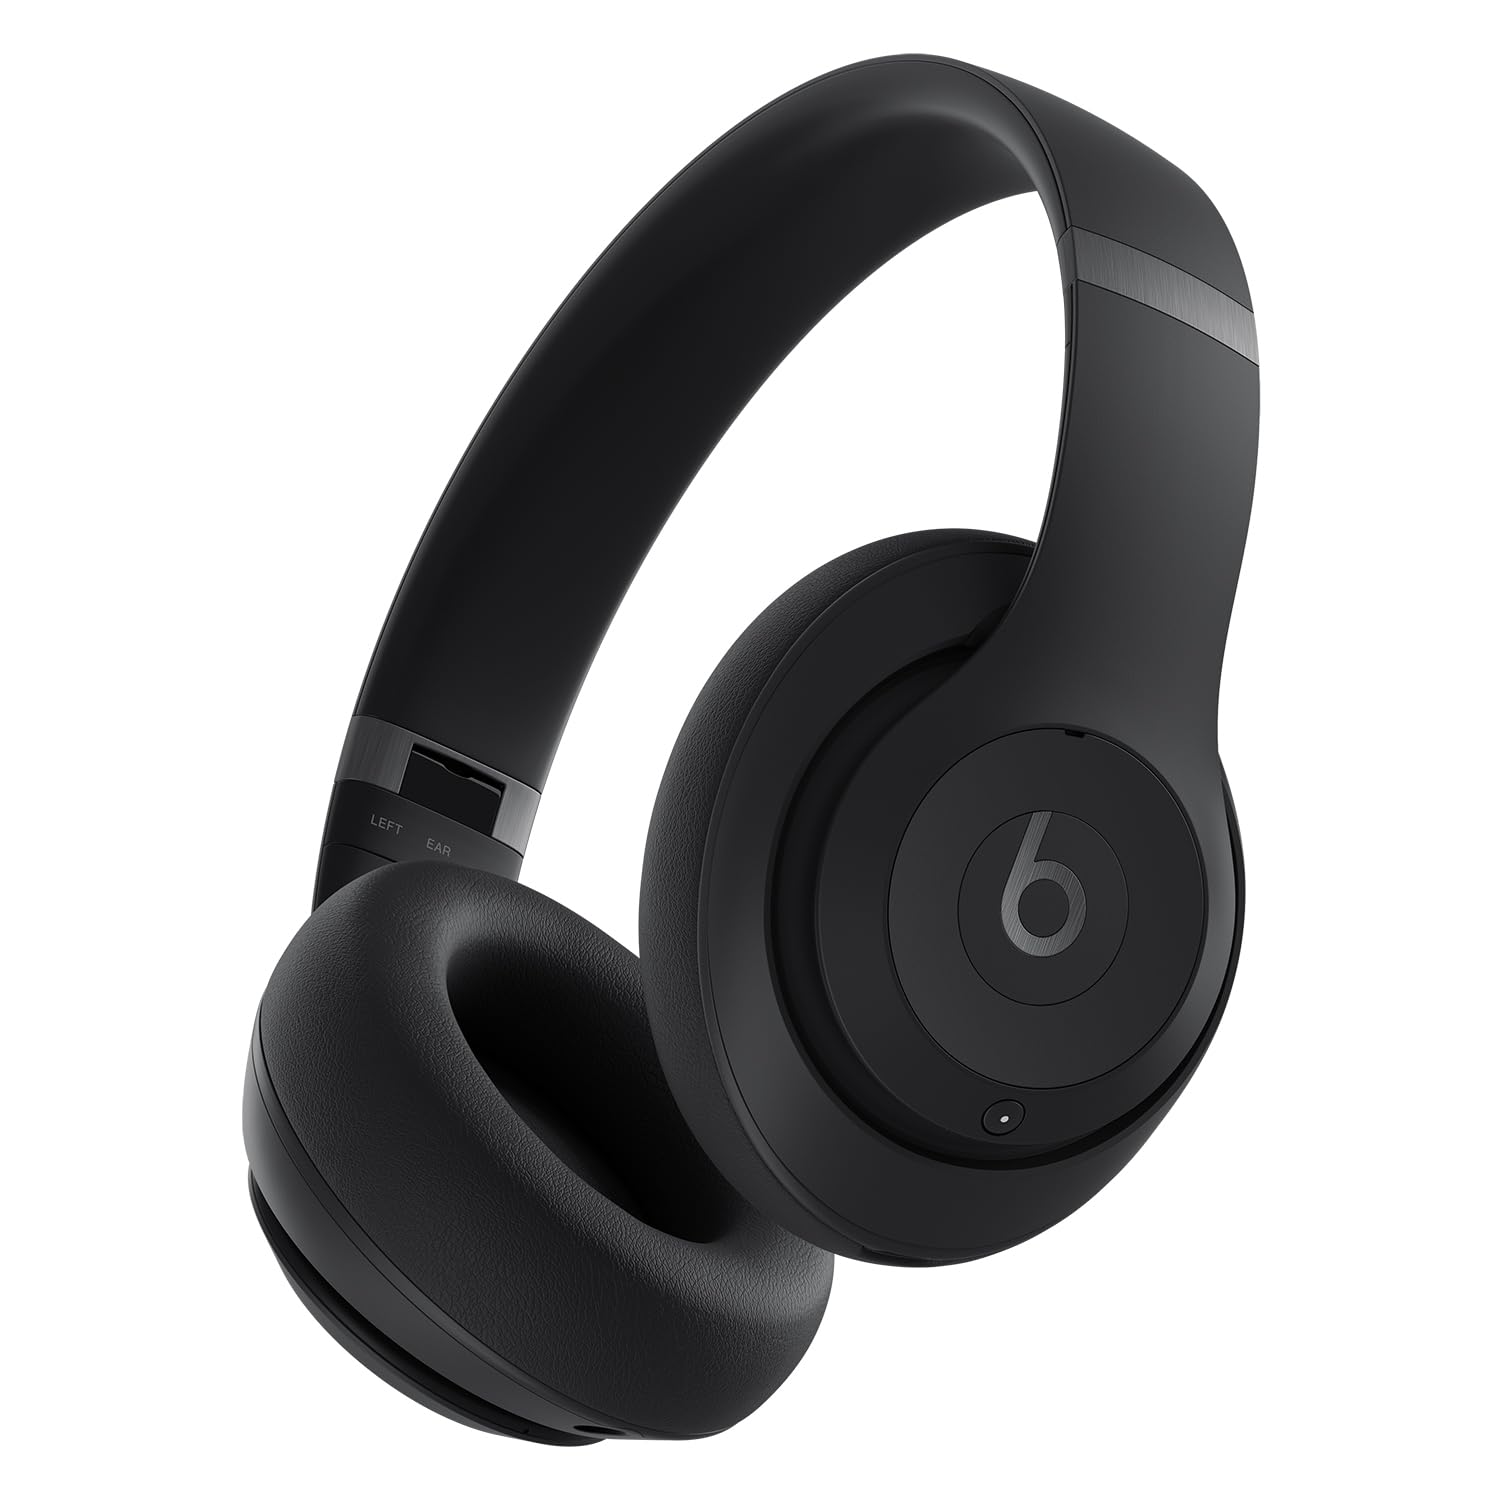 Beats Studio Pro - Wireless Noise Cancelling Headphones - Spatial Audio, USB-C, Apple & Android Compatible - 40-Hour Battery $199.95